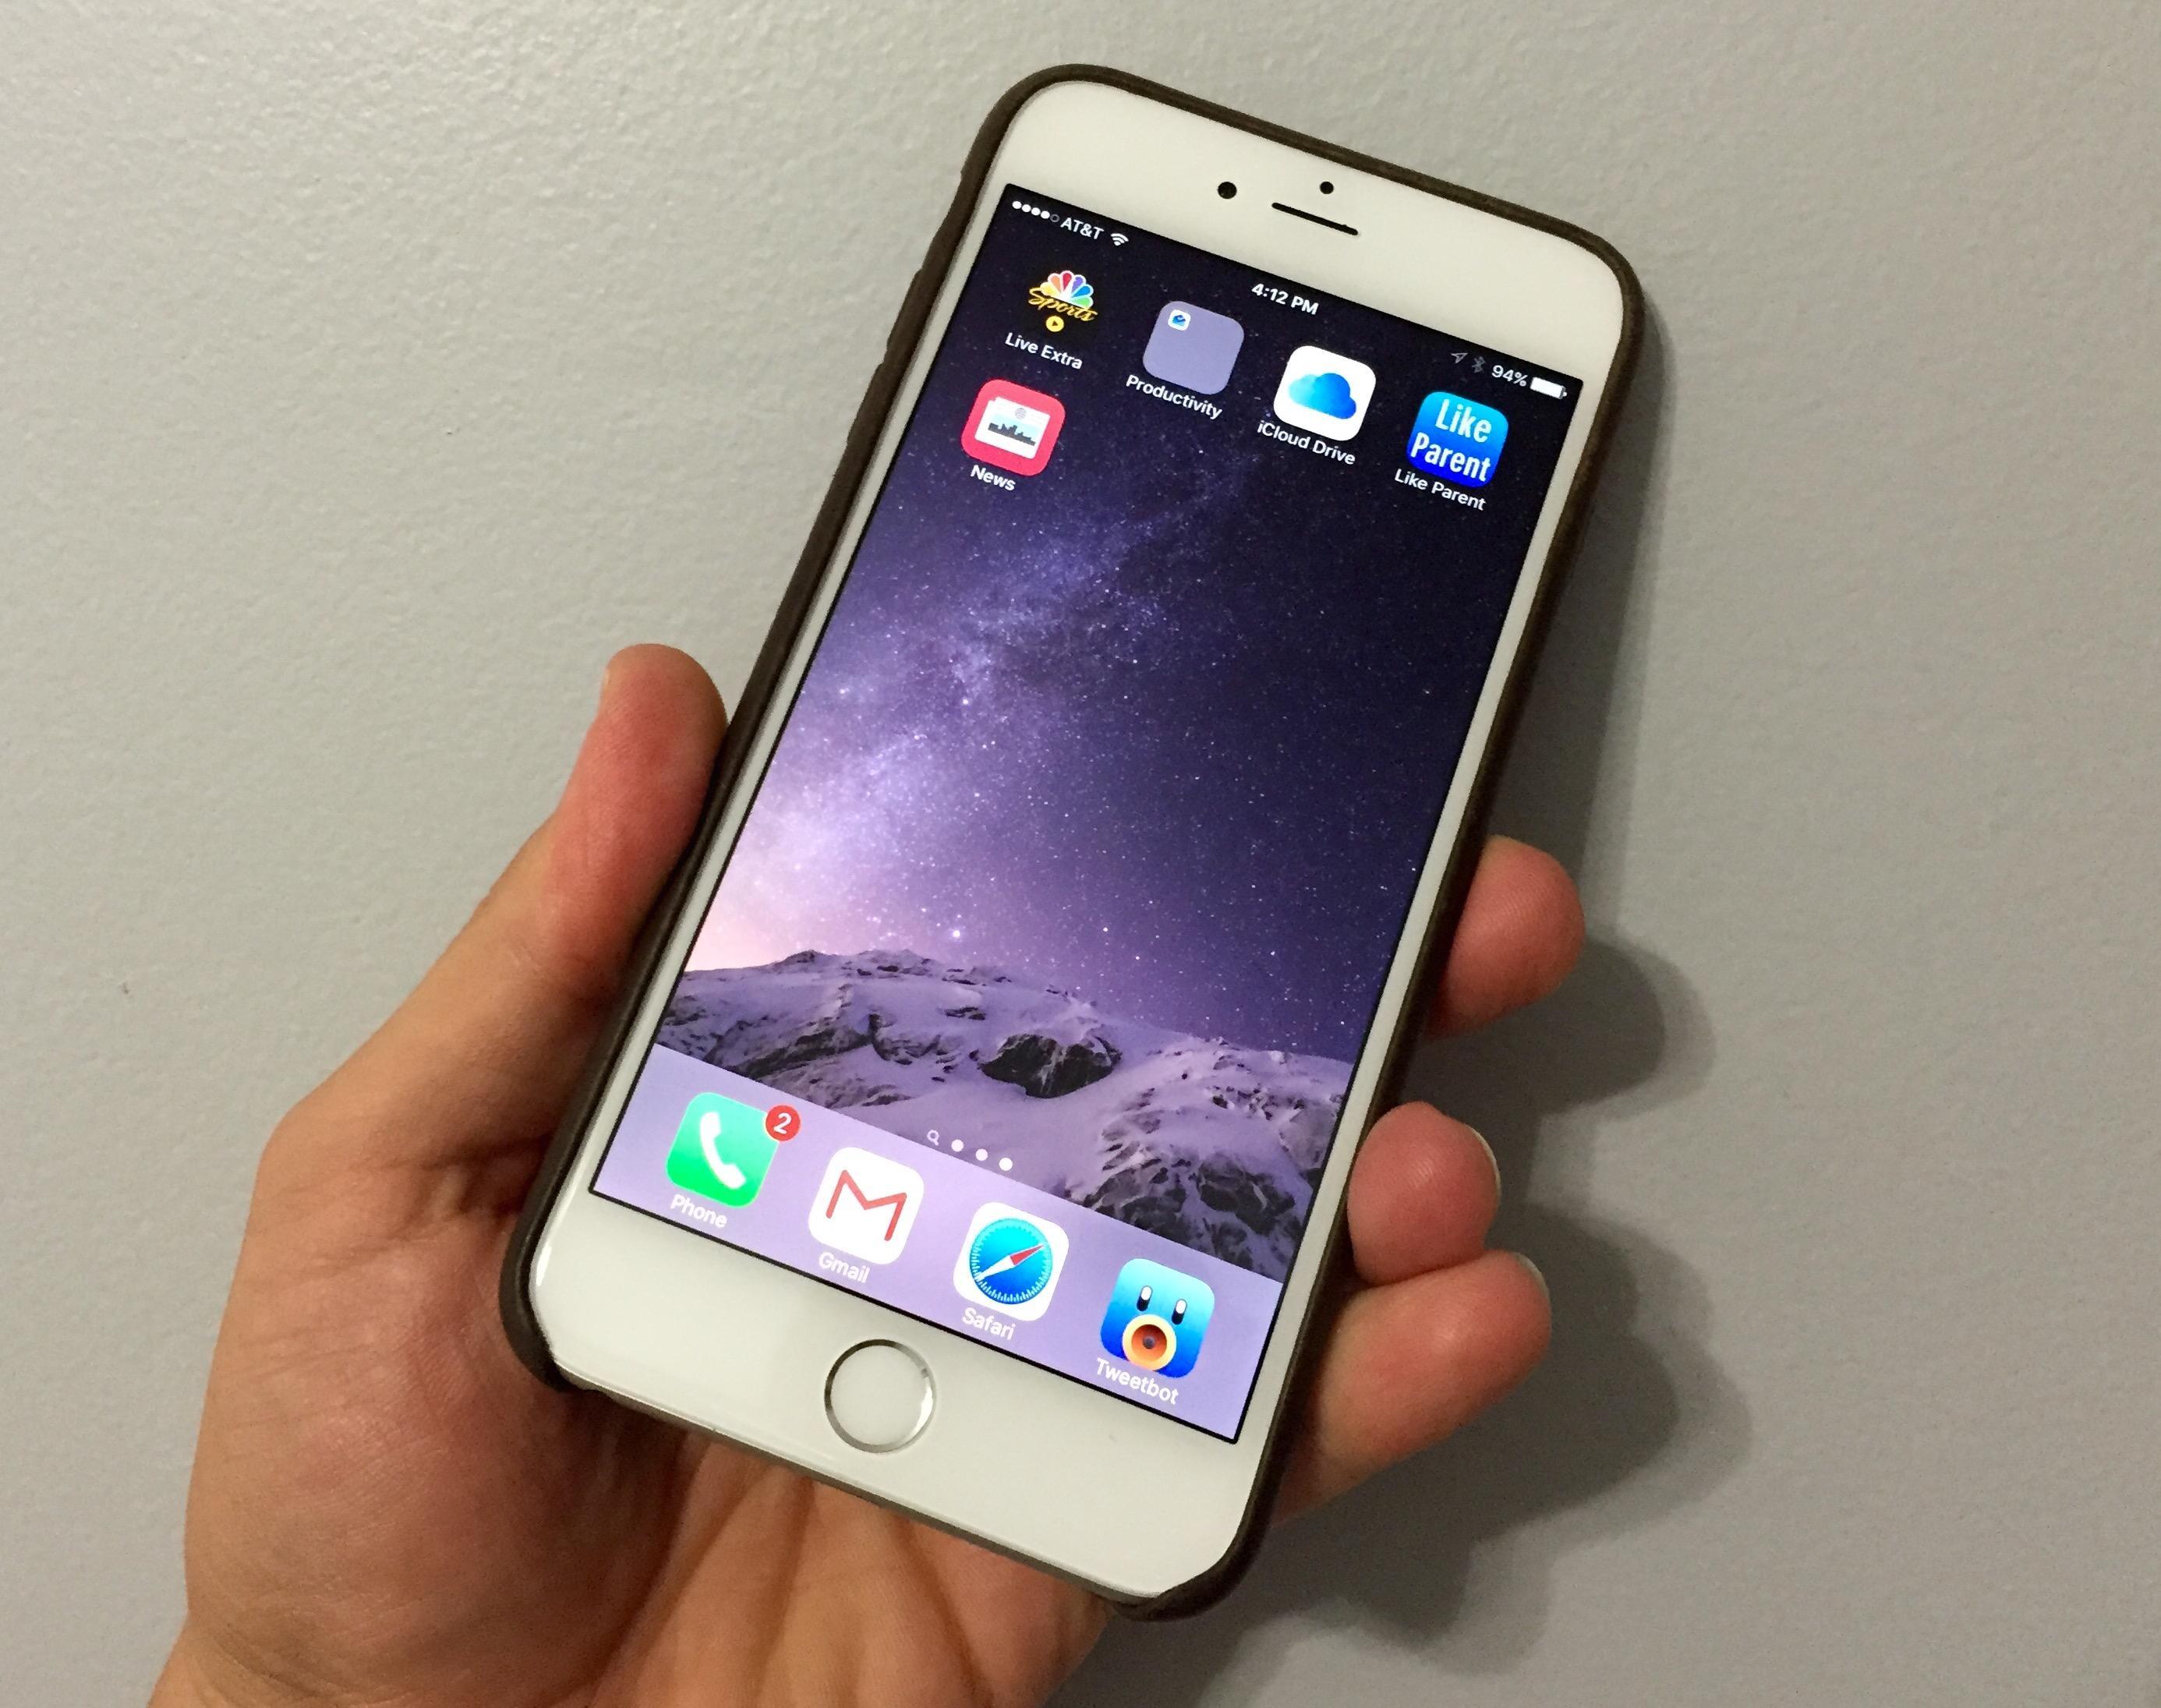 Check out10 exciting, un-announced iOS 9 features.